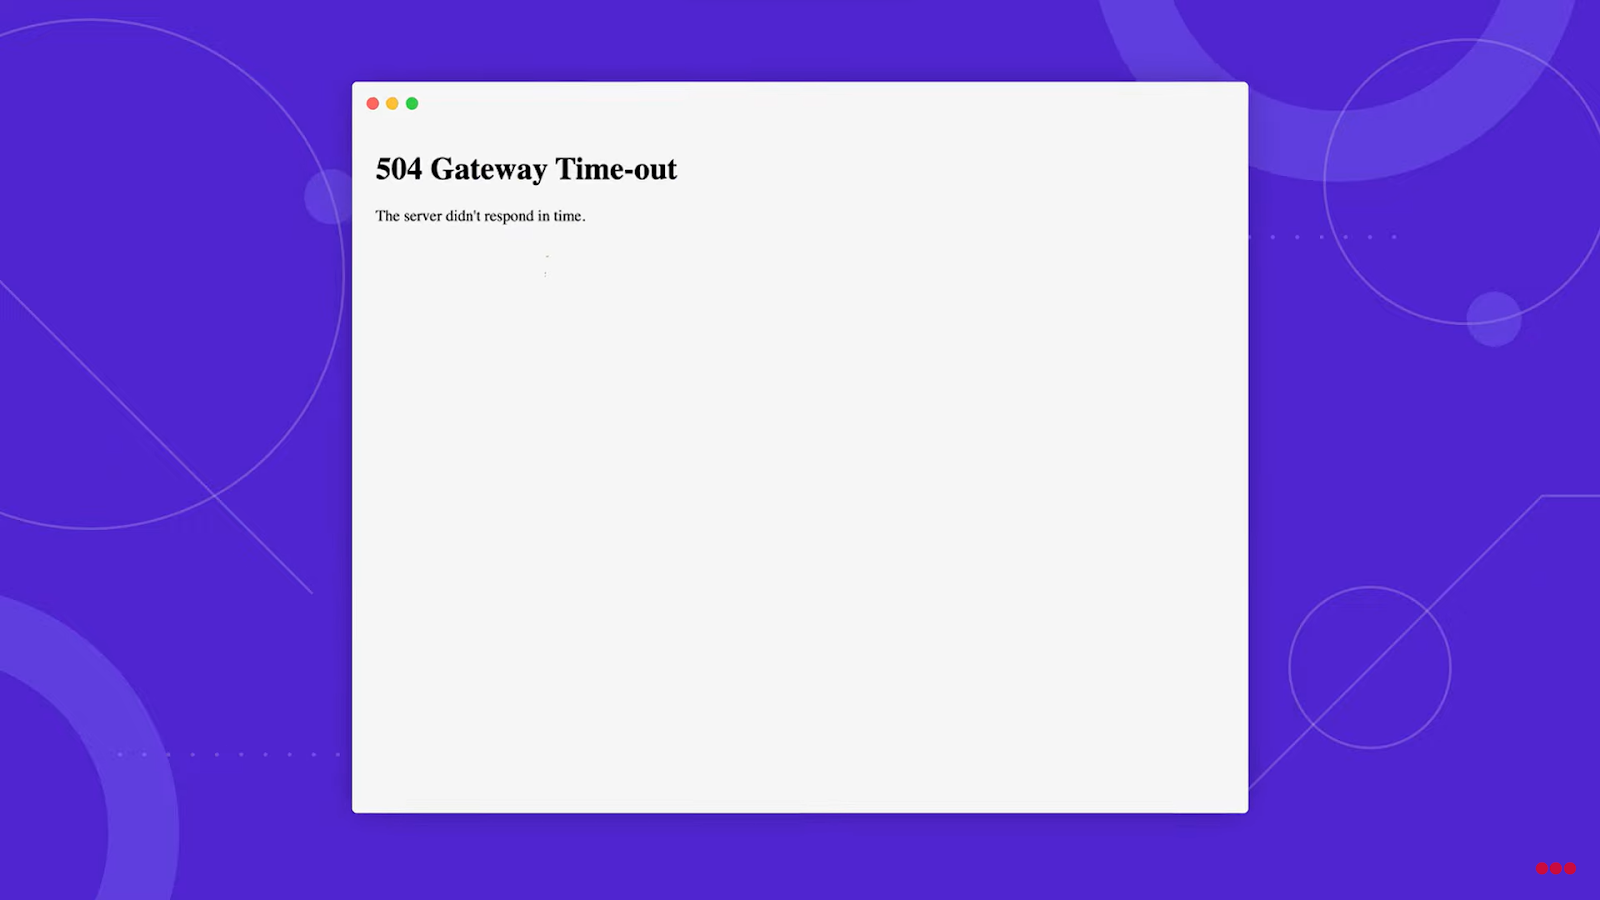 A minimalist 504 Gateway Time-out error screen with a purple background and abstract shapes